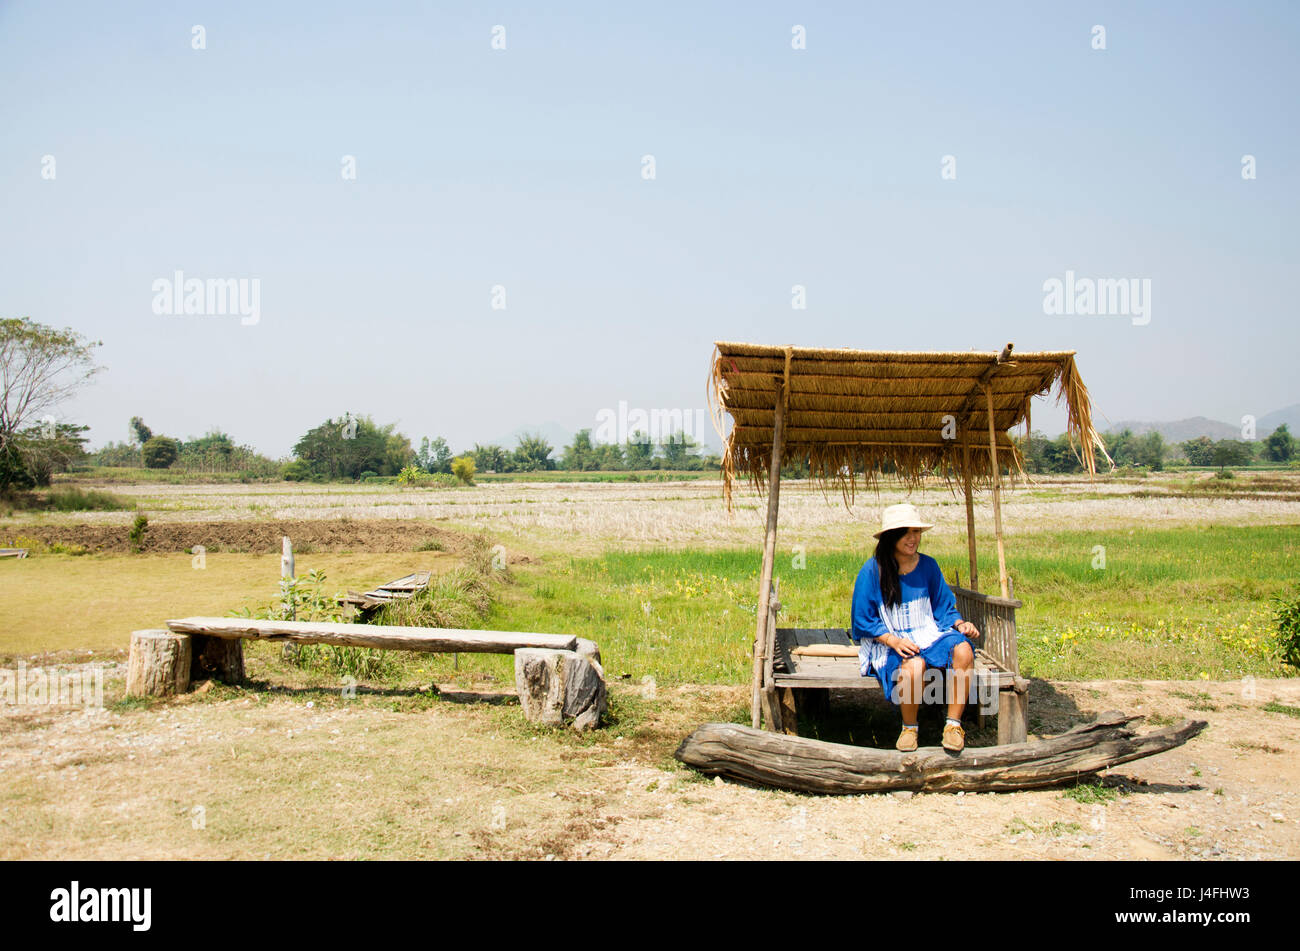 Thai Women People Travel And Posing Sit In Hut At Garden With